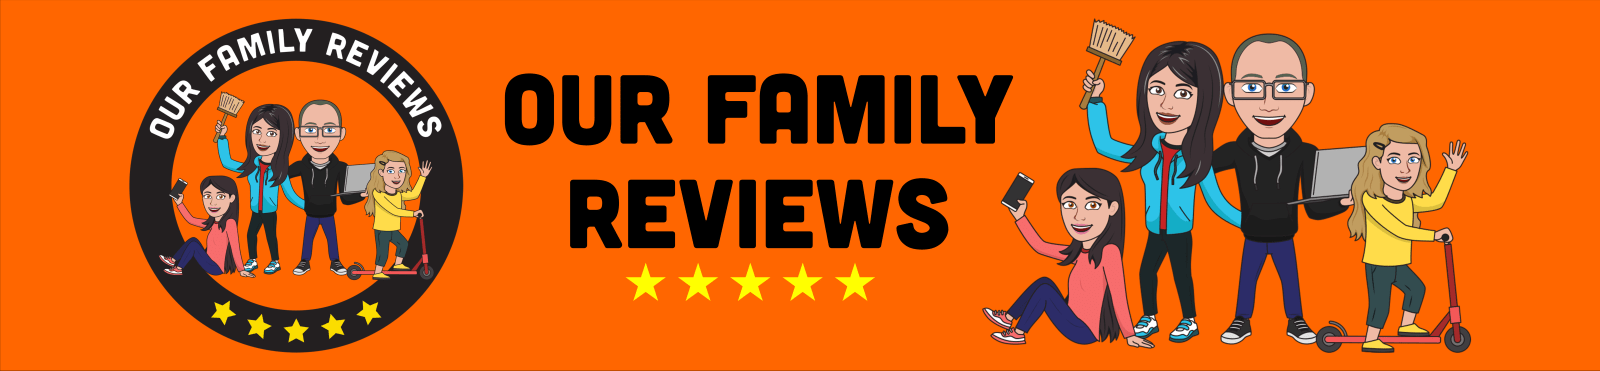 Our Family Reviews